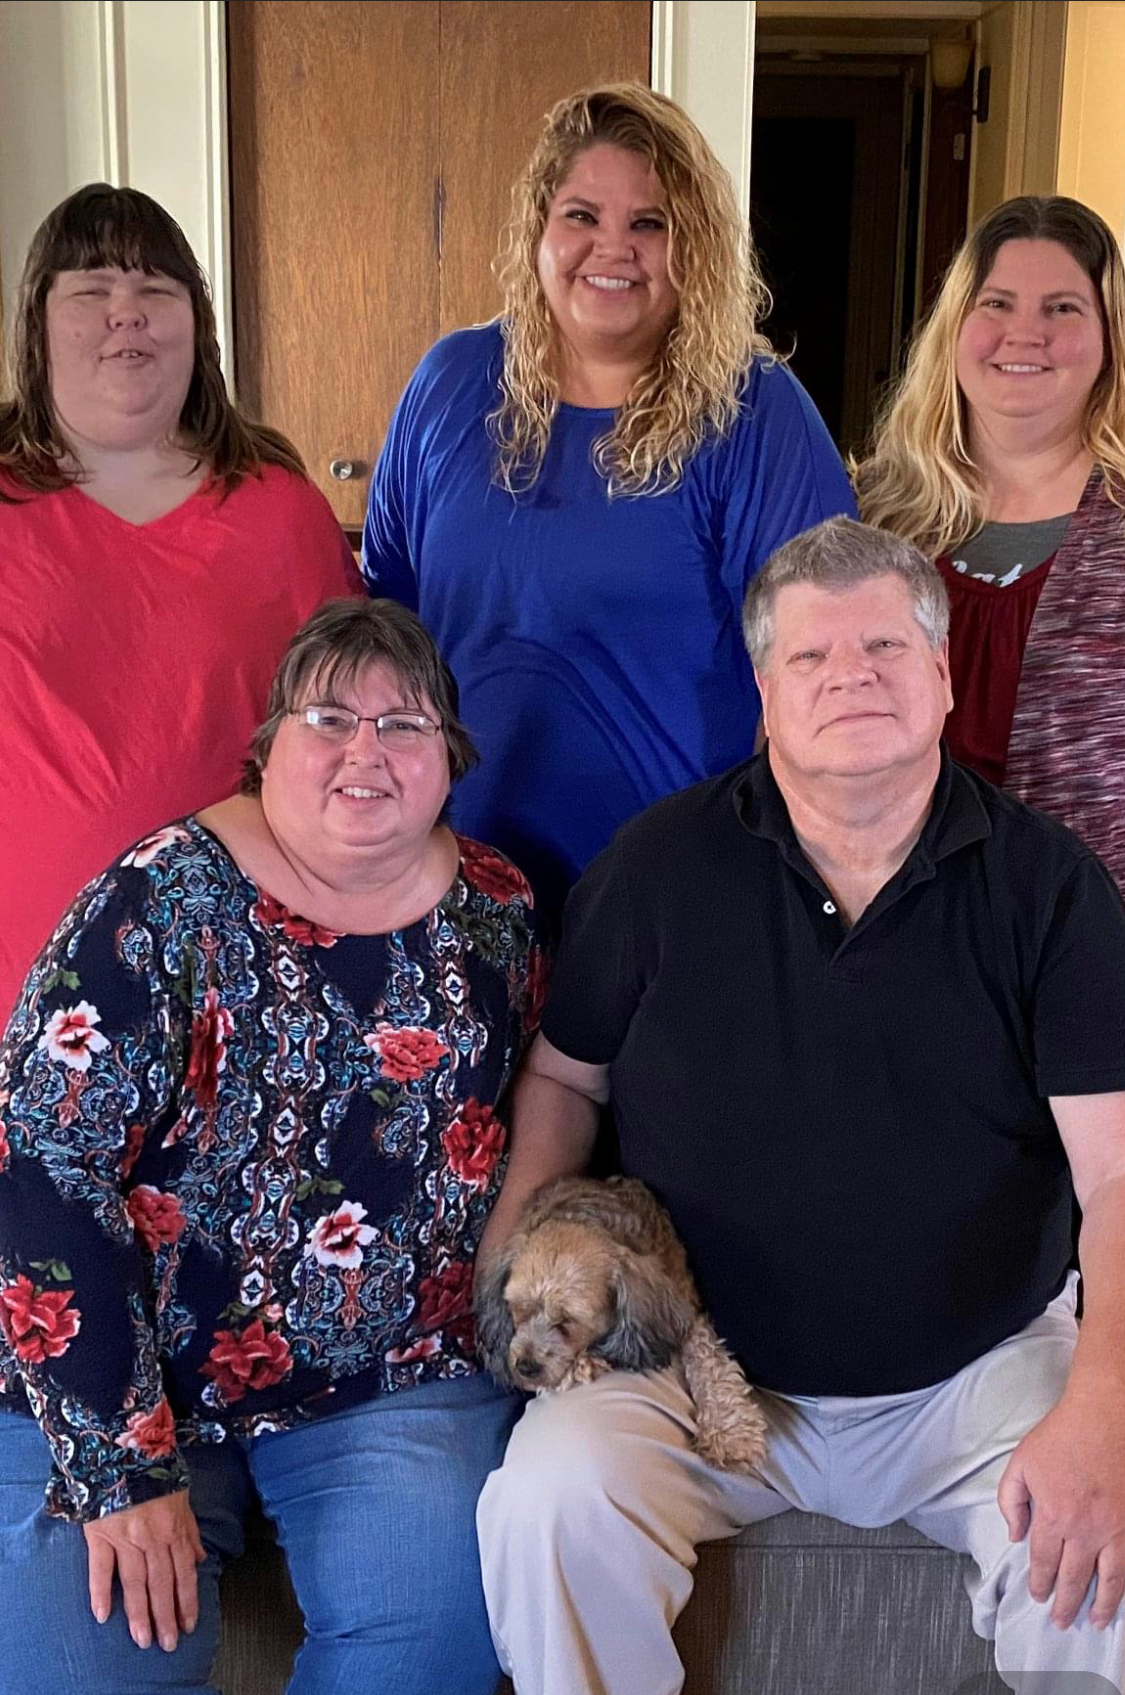 Shawna Gilleland, top left, poses for a family photo with her sisters, Kelly and Chera Gilleland, and their parents, Randal and Martha Gilleland.